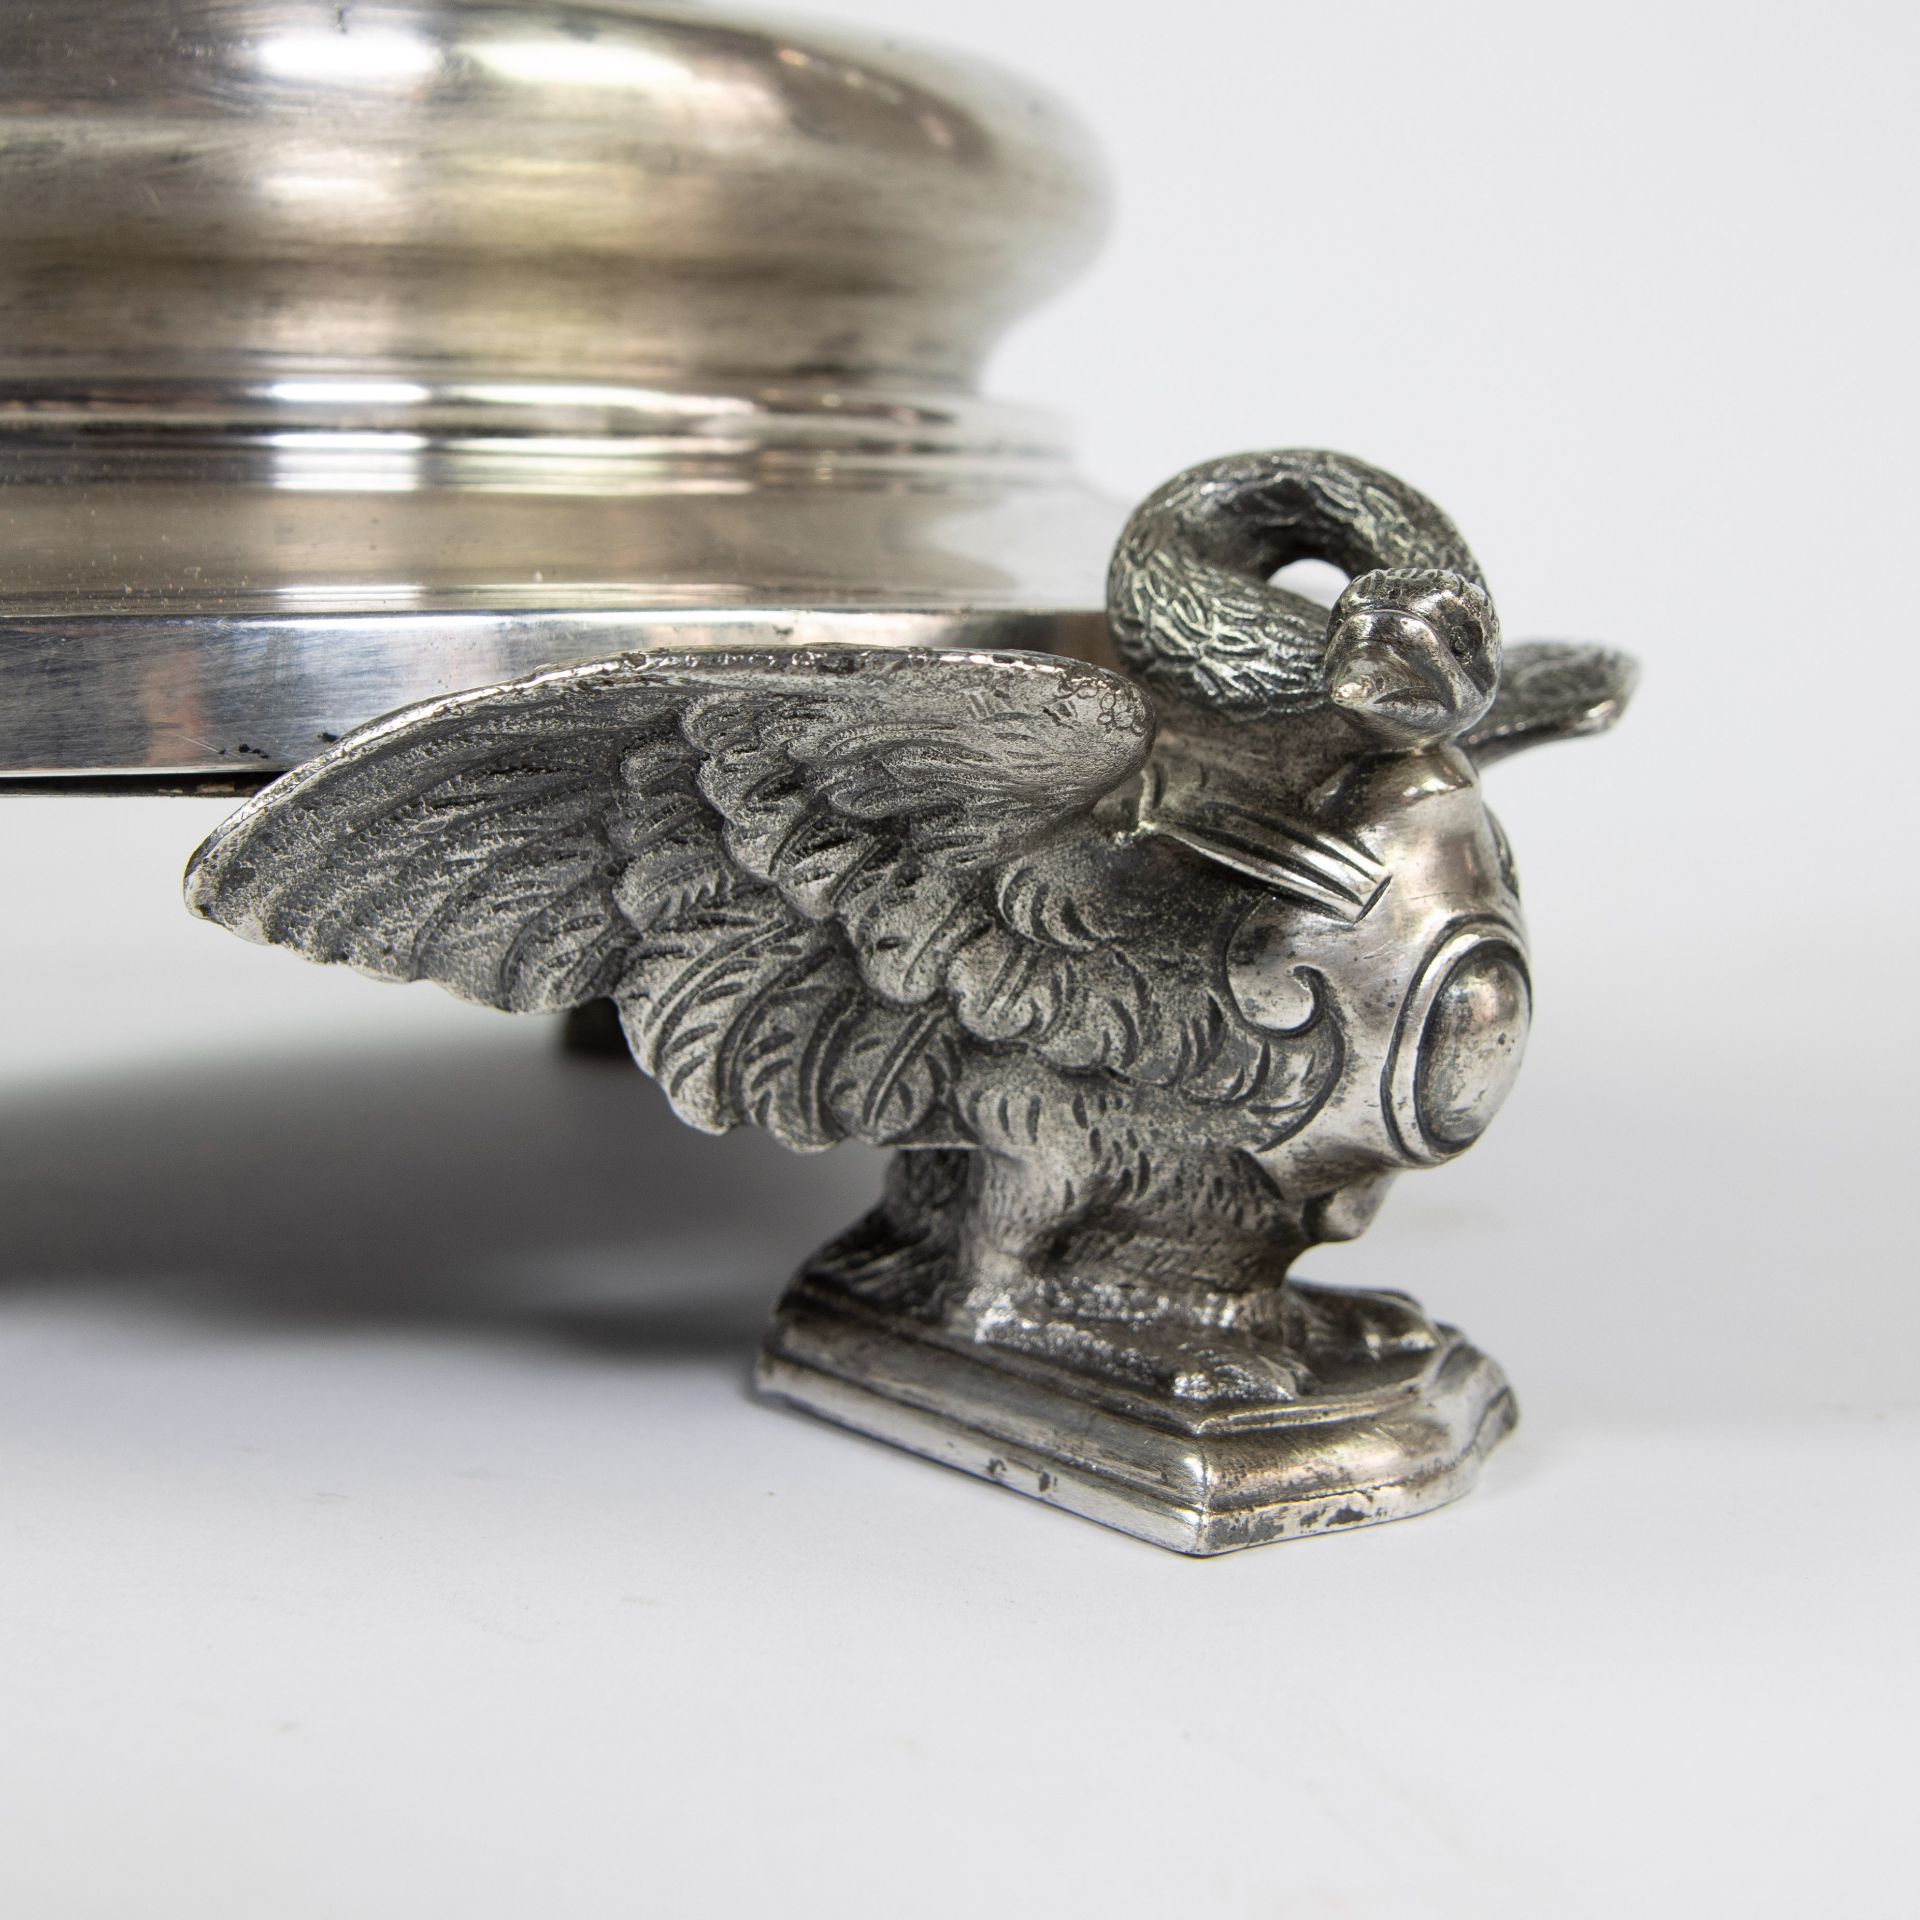 Silver plated candlestick with three swans as legs - Image 2 of 5